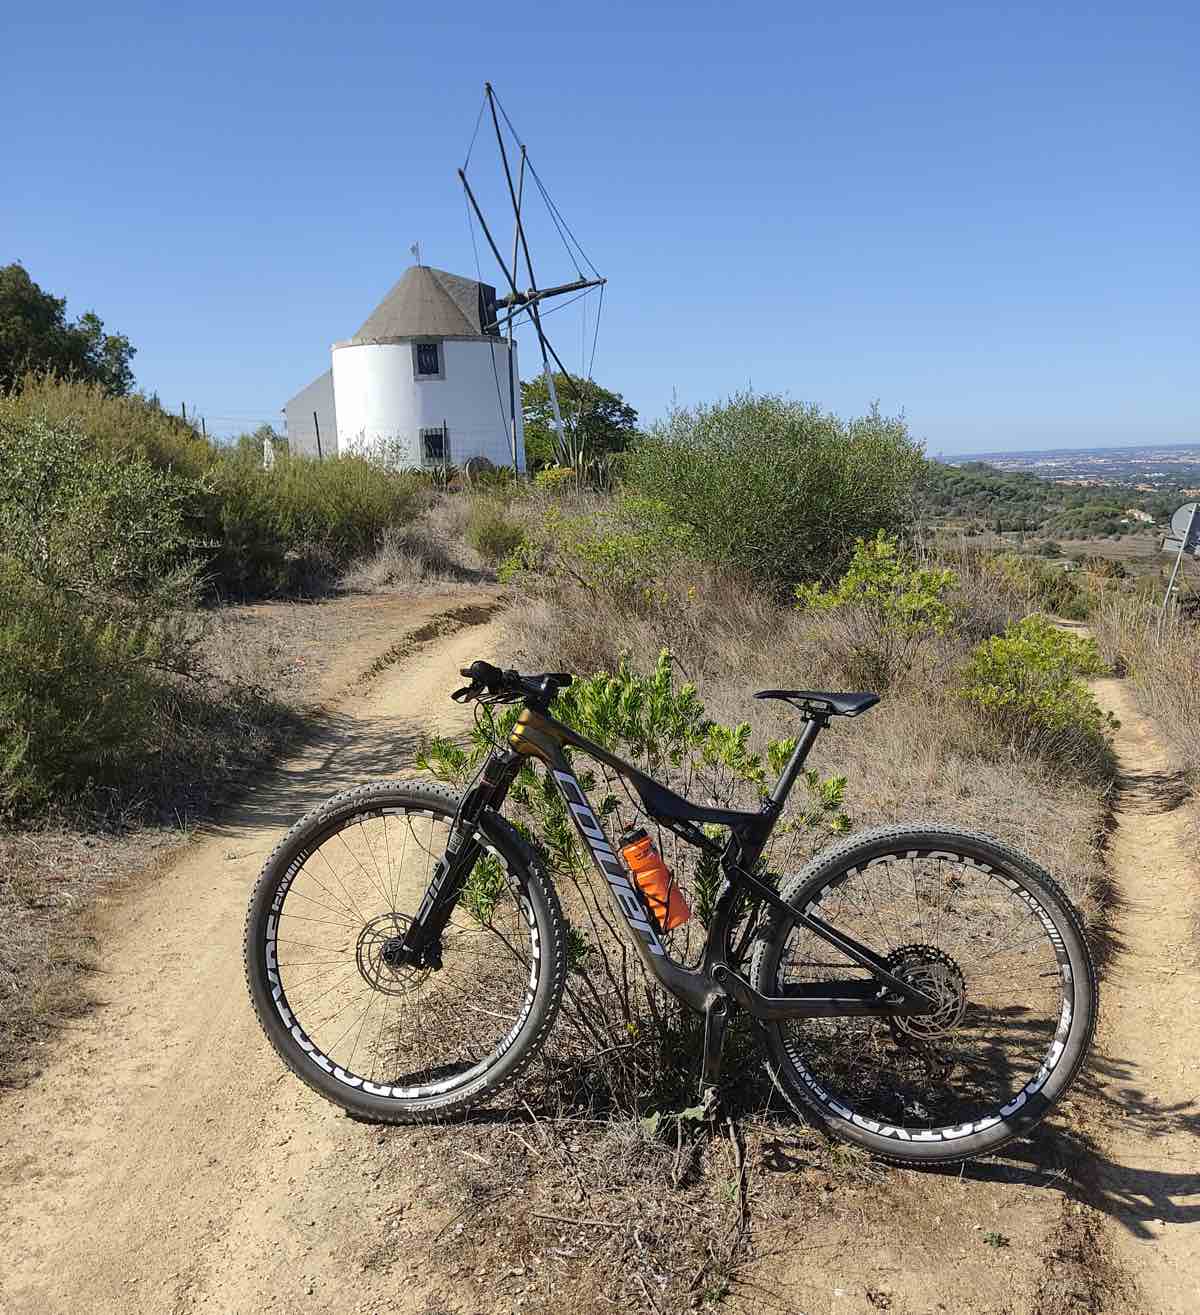 bikerumor pic of the day a mountain bike is on the side of a dirt trail leading up towards a squat windmill there is brush along the trail and the sky is clear and blue